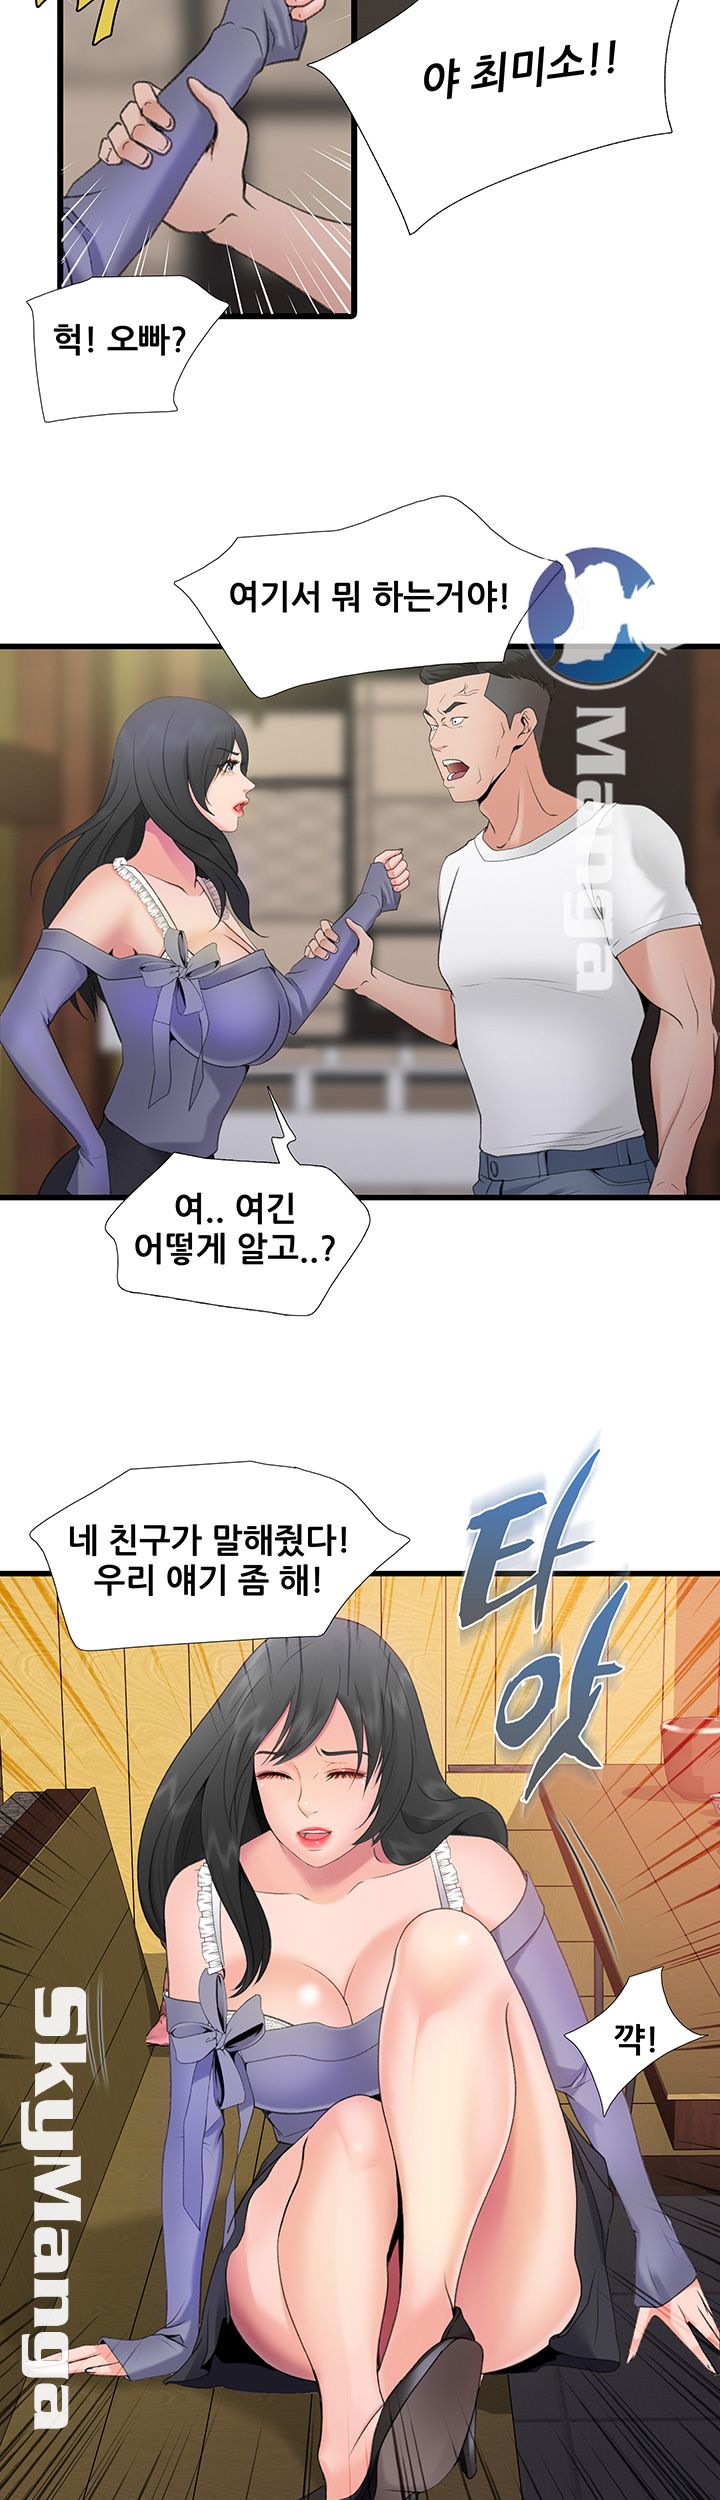 Dancing Wind Raw - Chapter 2 Page 46